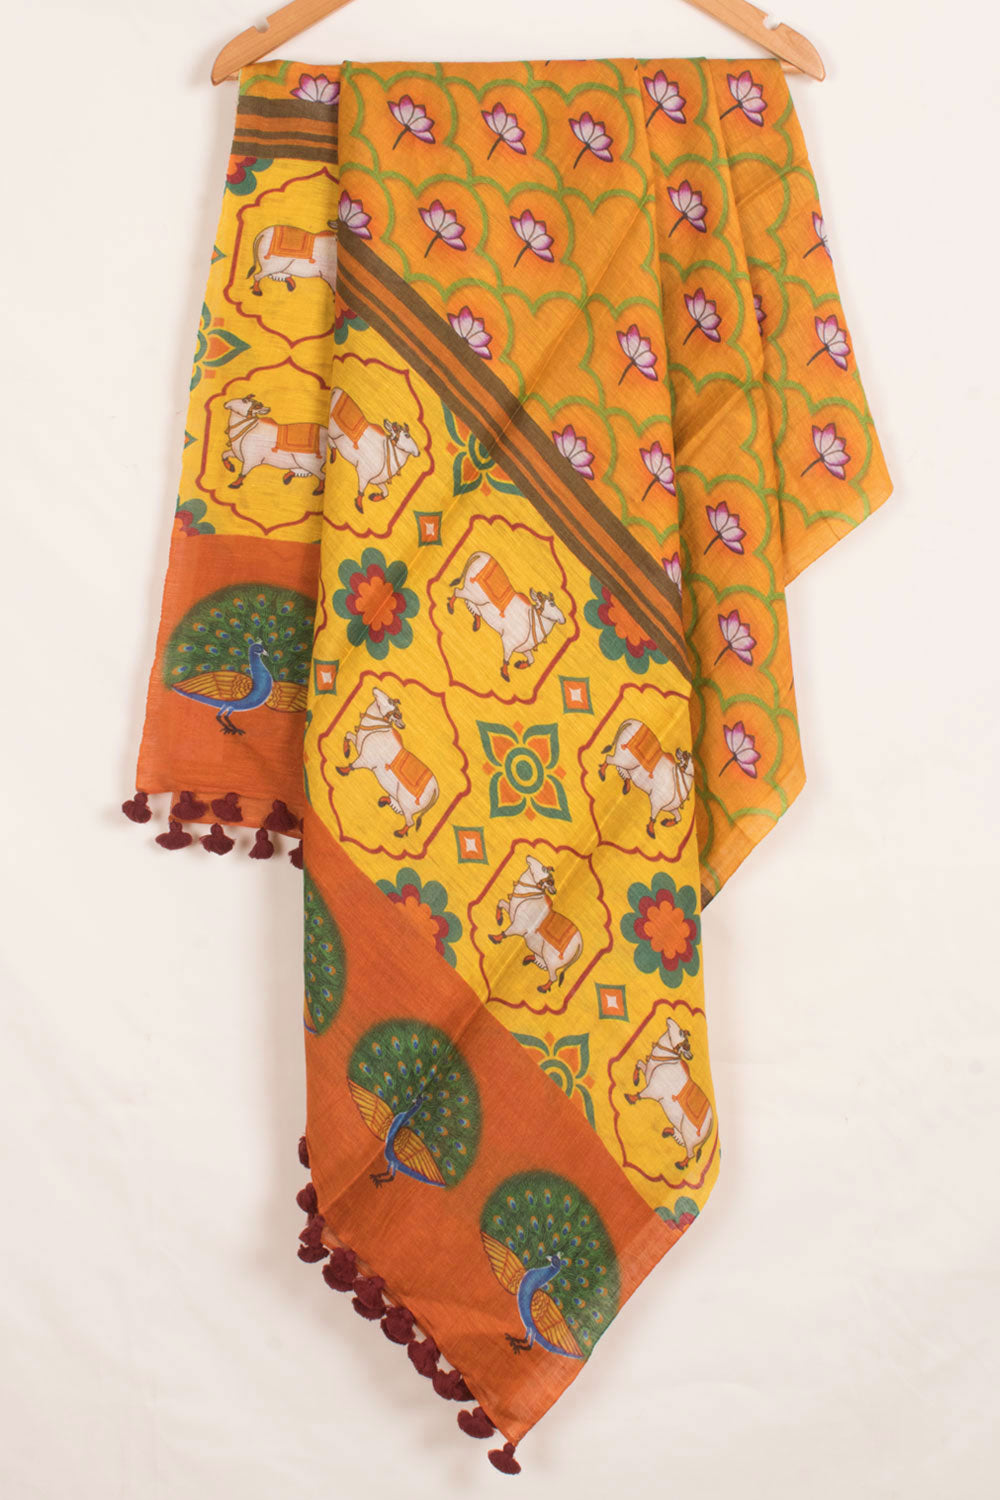 Pichwai Printed Tussar Linen Dupatta with Motif of Cows, Peacock and Floral Design